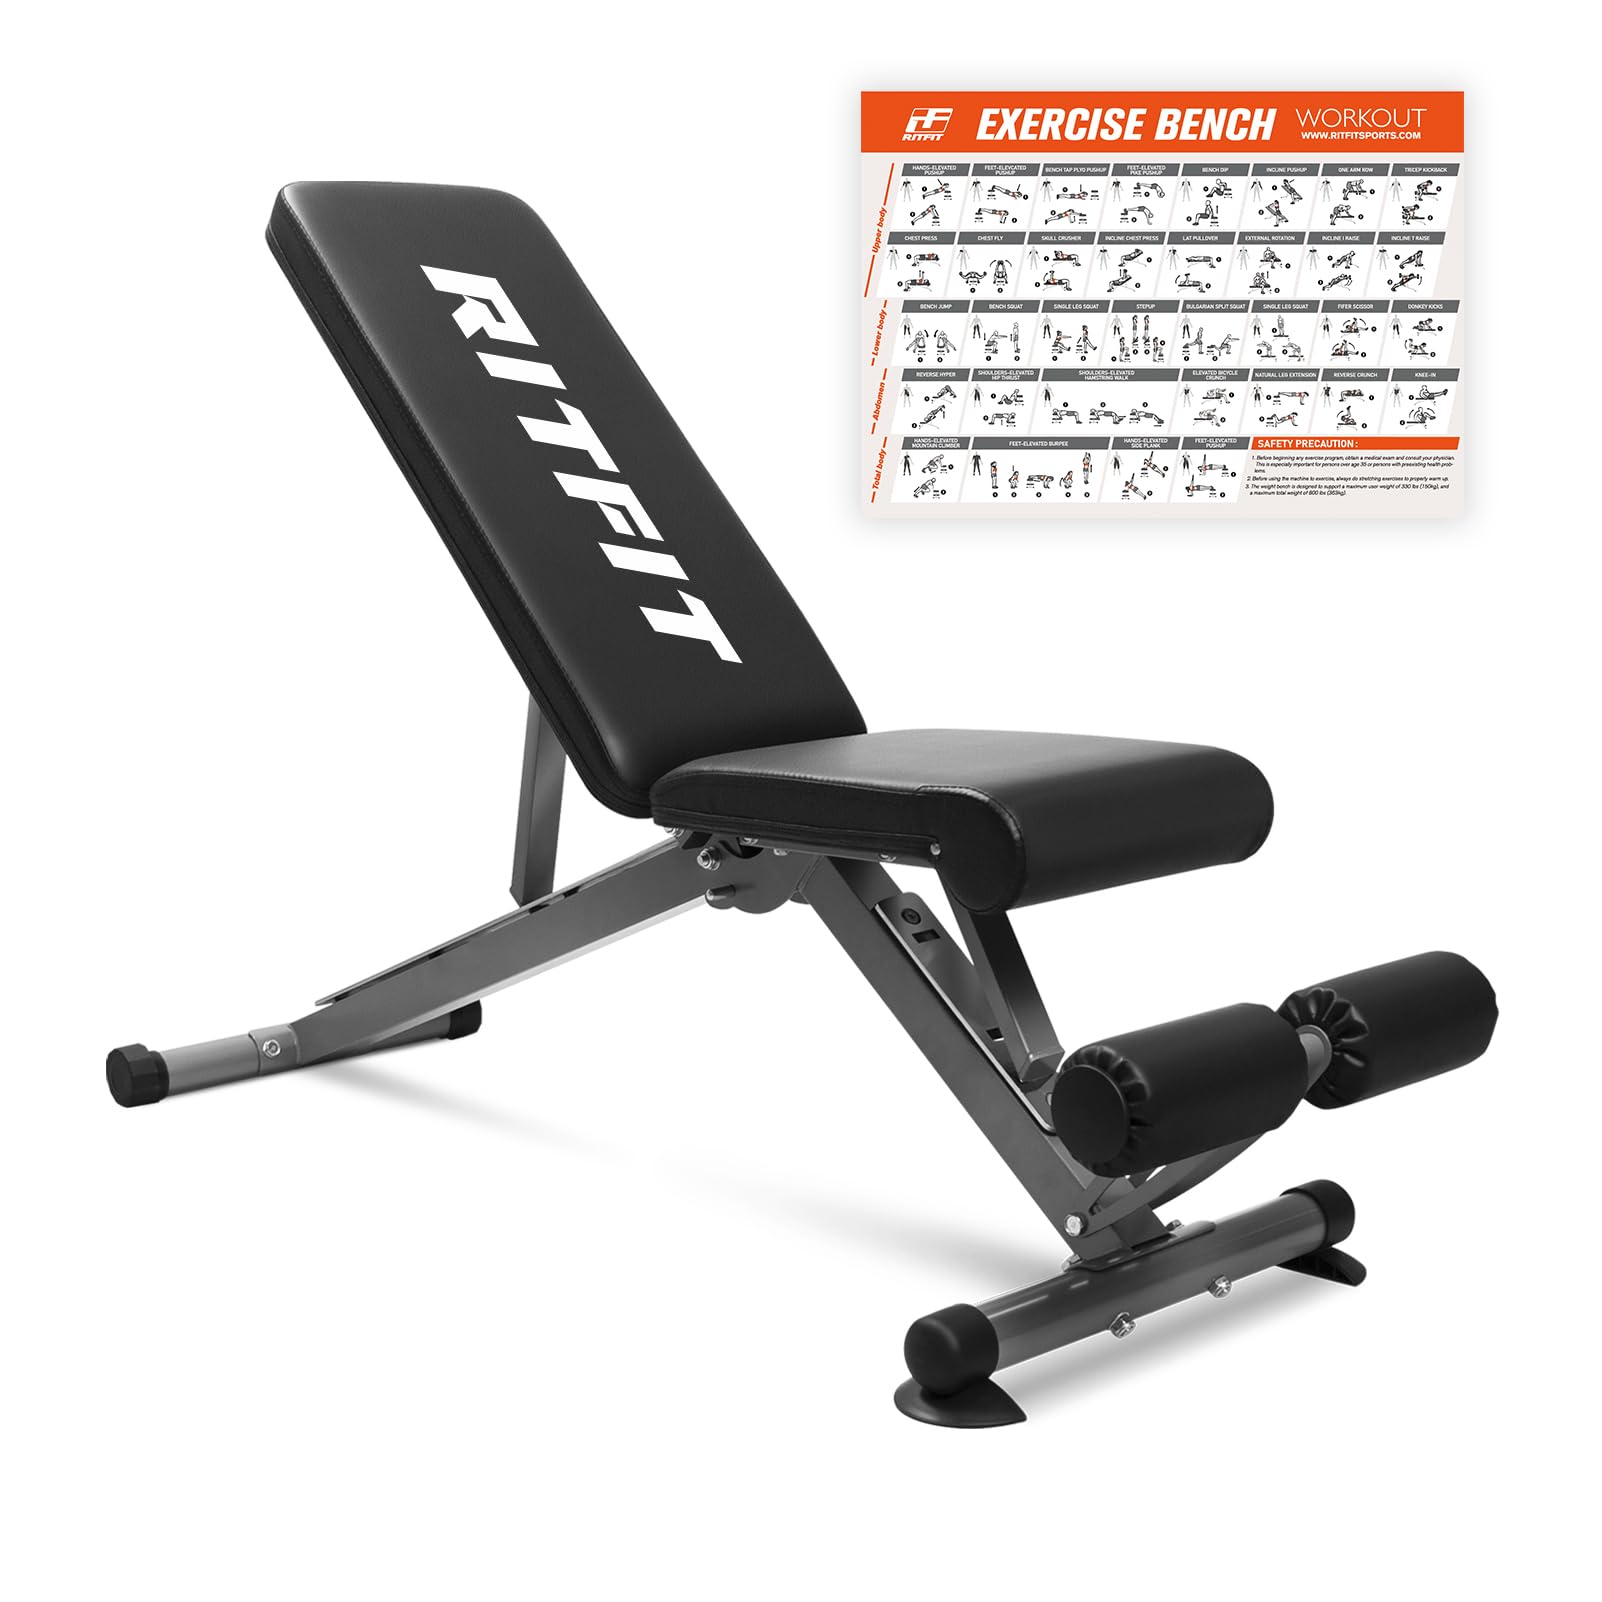 RitFit AdjustableFoldable Utility Weight Bench for Home Gym Weightlifting and Strength Training - Bonus Workout Poster with